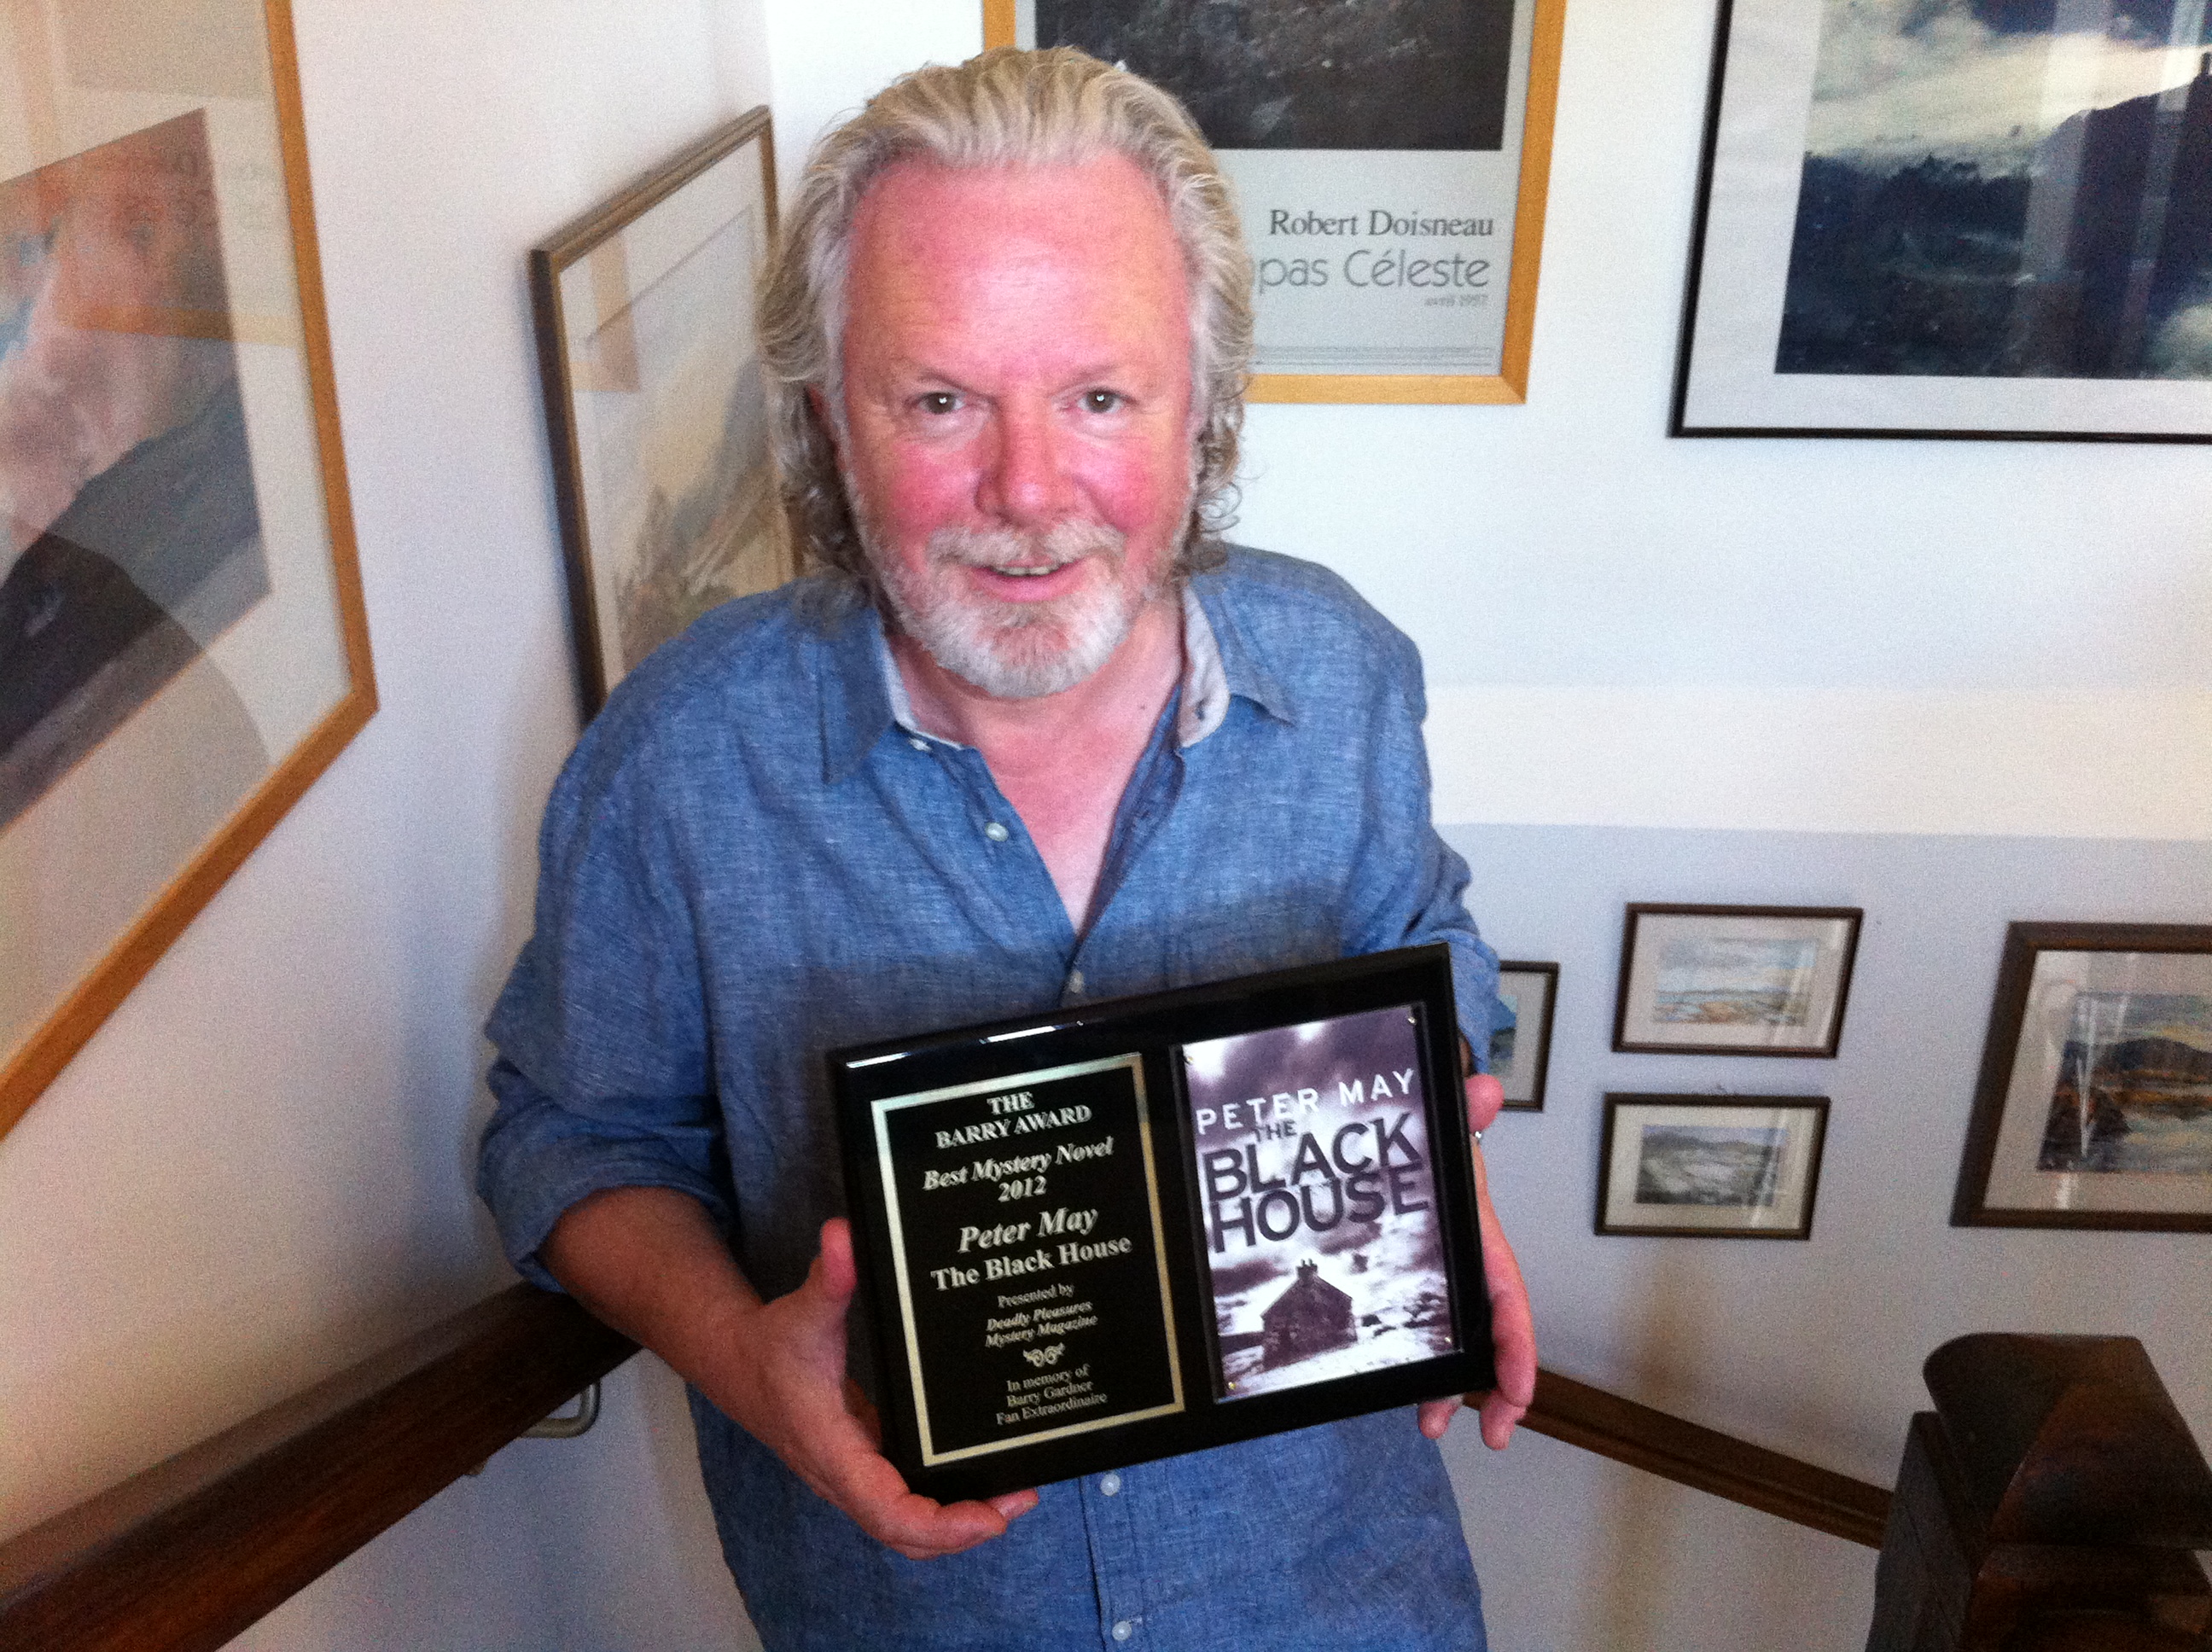 Peter May with Barry Award